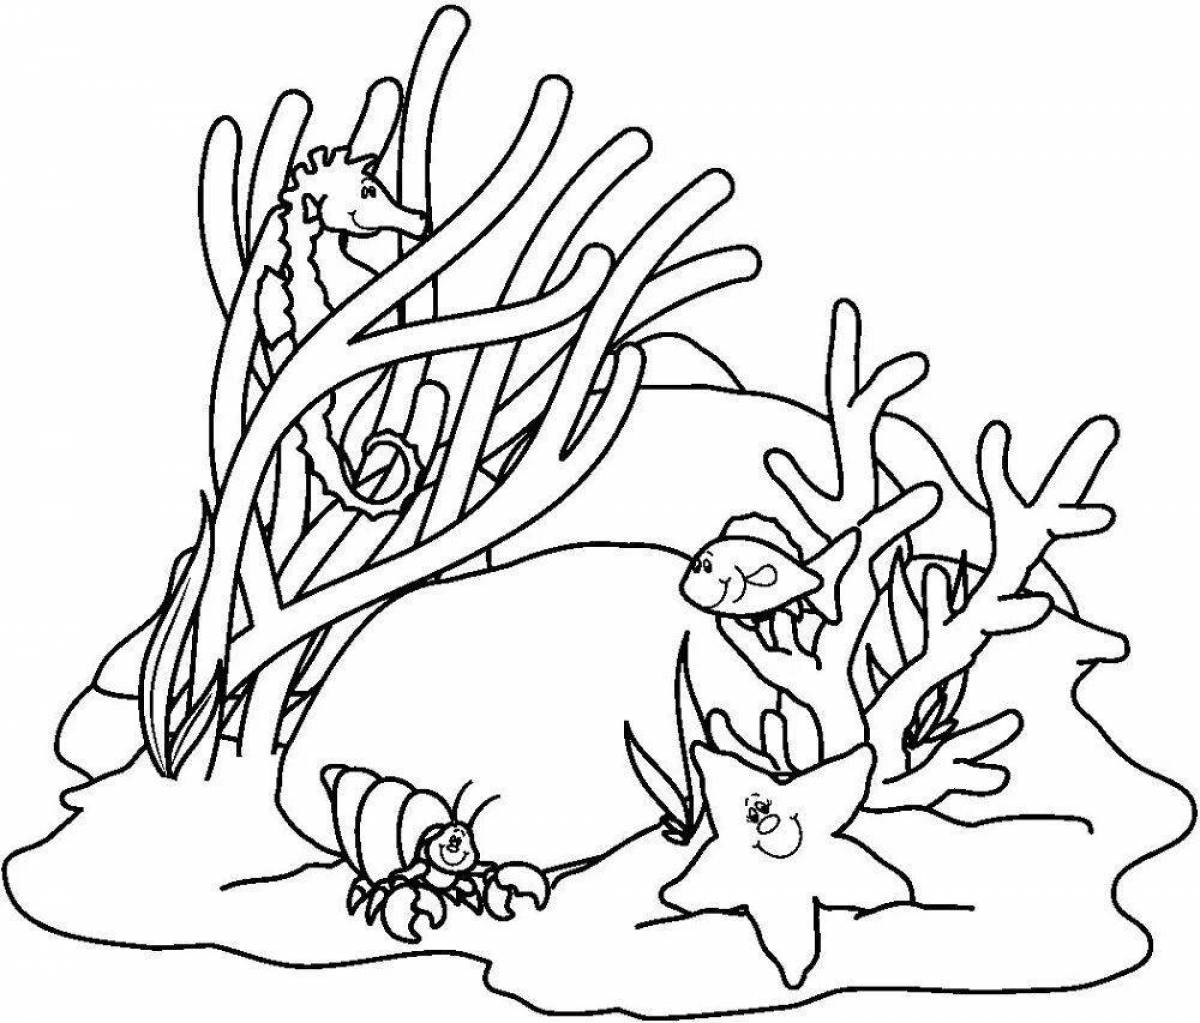 Glamorous coral coloring pages for kids